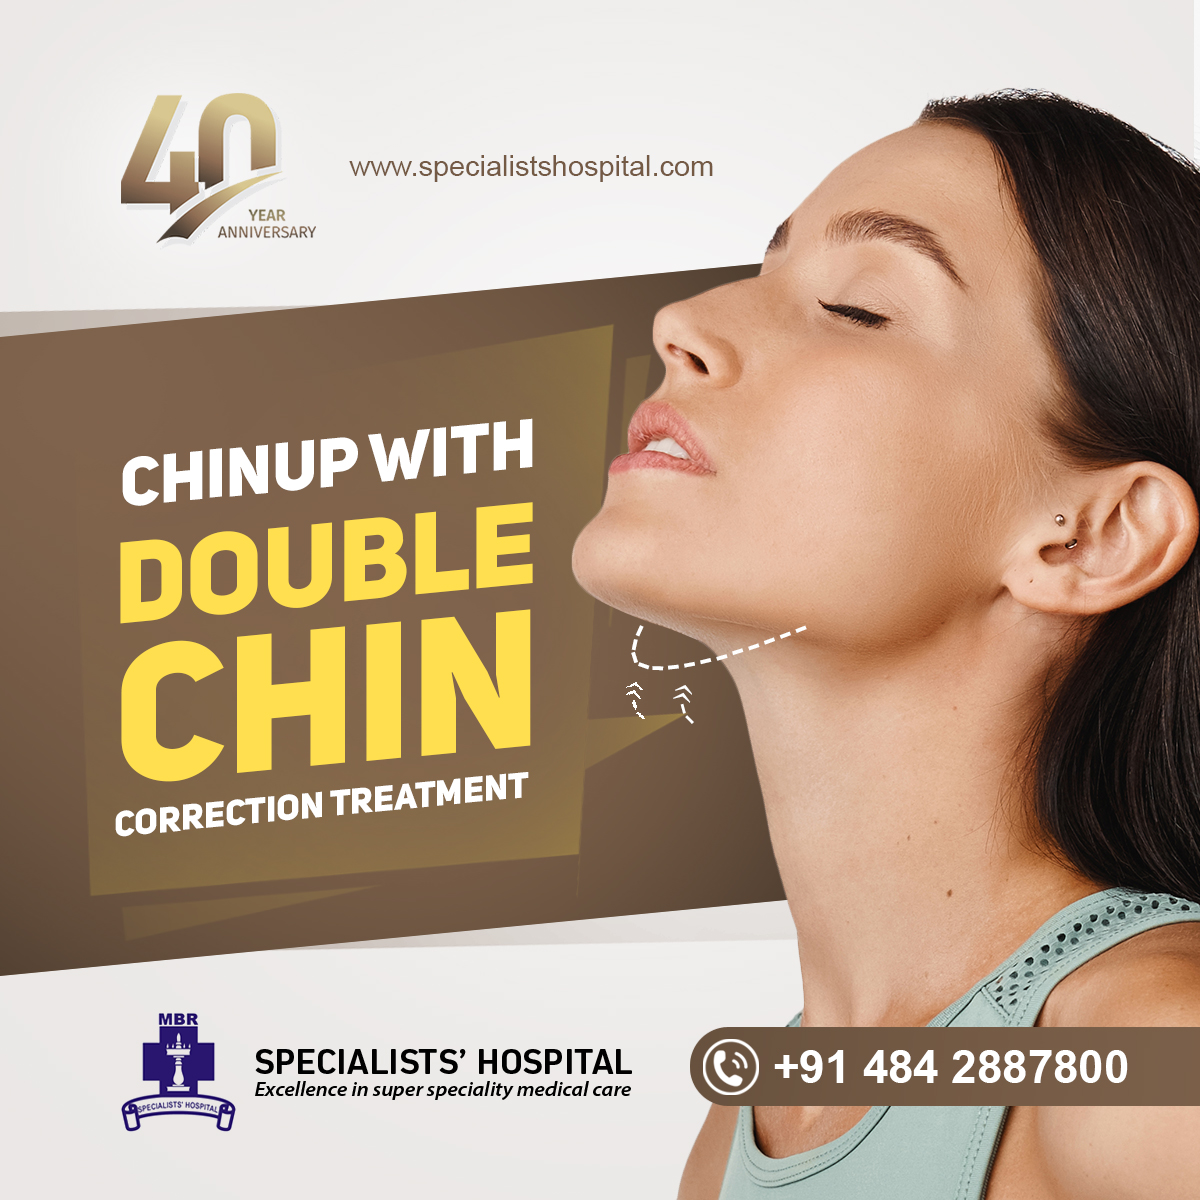 Double chin bothers many and most often diet and exercise will not help fix it. Double chin correction is done to correct saggy area around the chin.

#doublechincorrection #liposuction #genioplasty #saggyskin #redefinedjawline #retreadedchin #protrudedchin #chinaugmentation